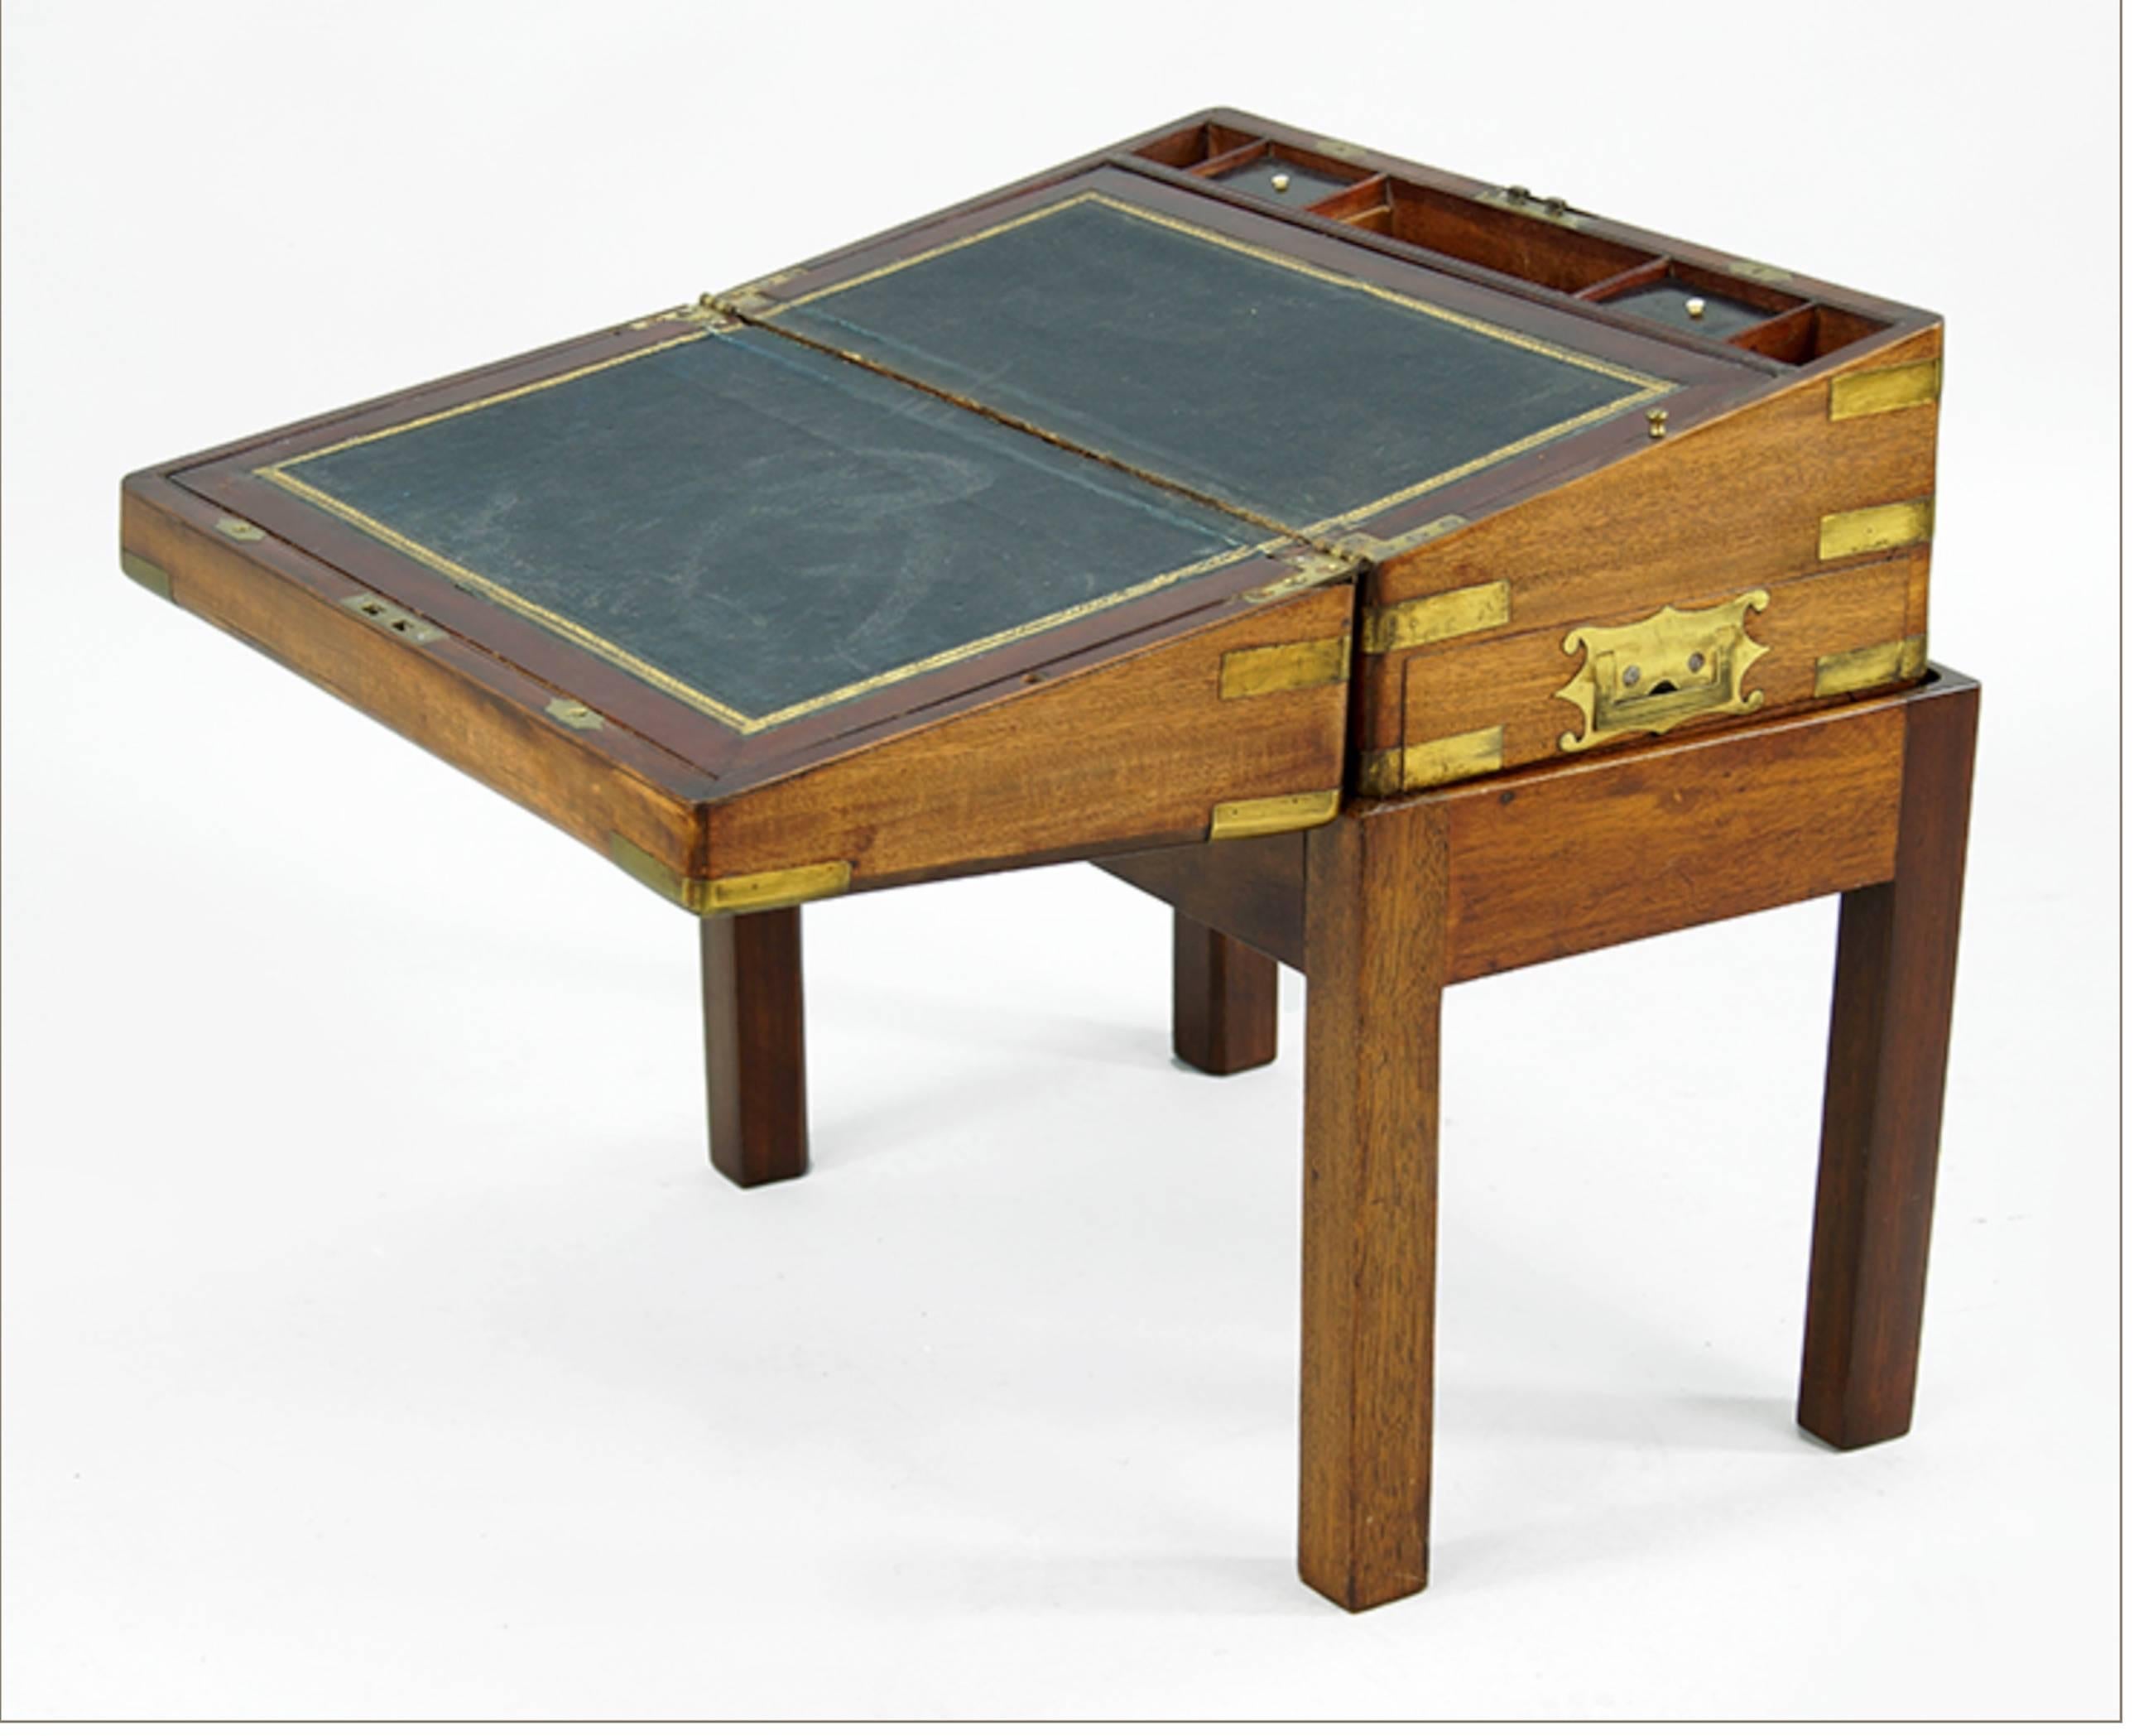 English George III mahogany writing box on later stand with brass inlay, great side table.